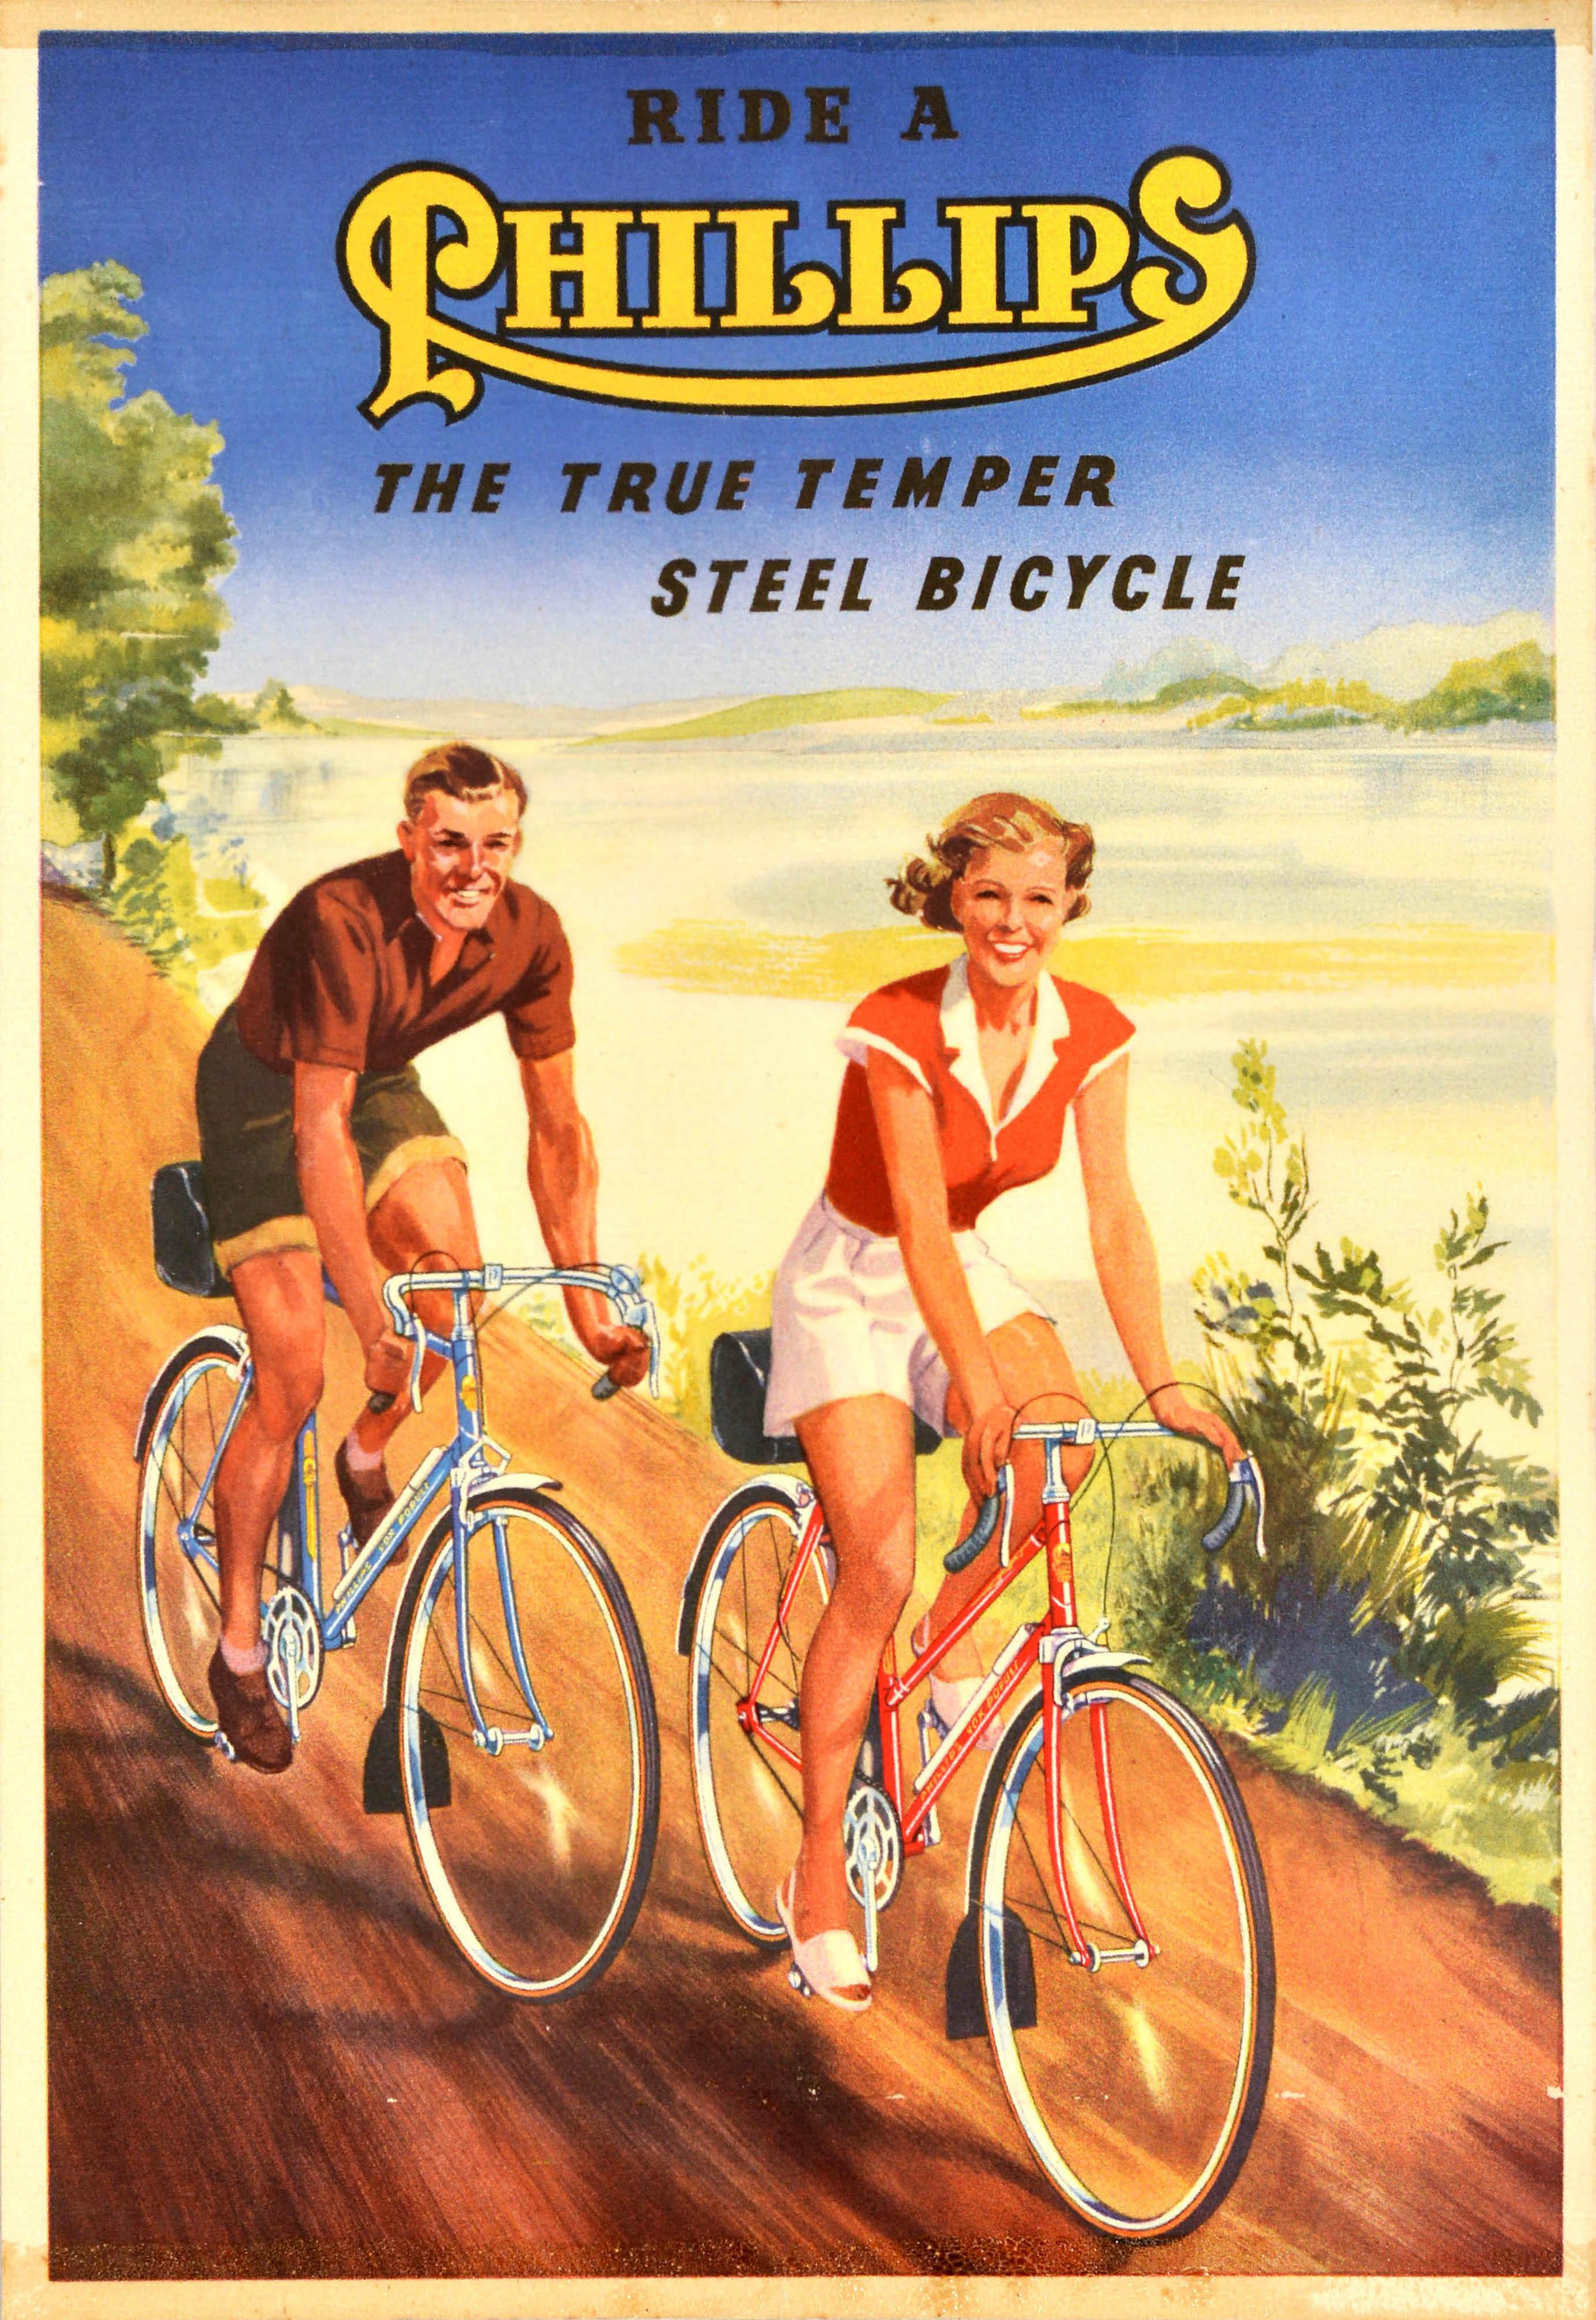 Unknown Print - Original Vintage Bike Poster Ride A Phillips Steel Bicycle Countryside Cyclists